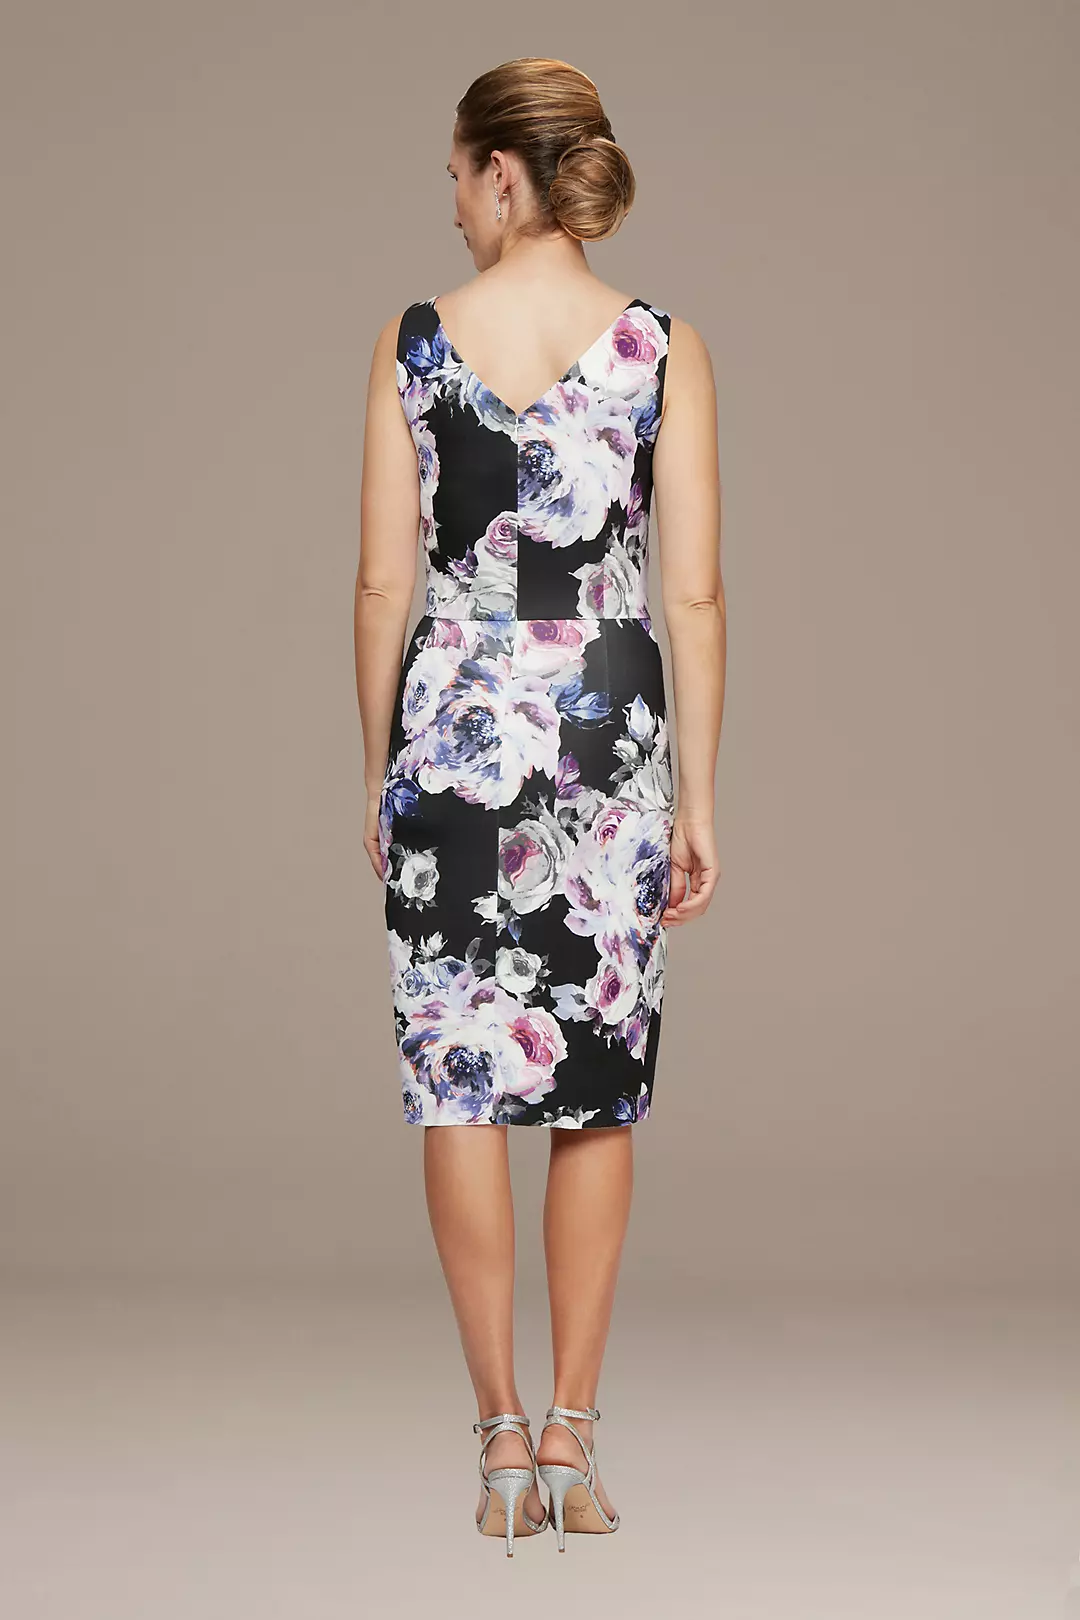 Floral Printed Dress with Cascade Detail | David's Bridal